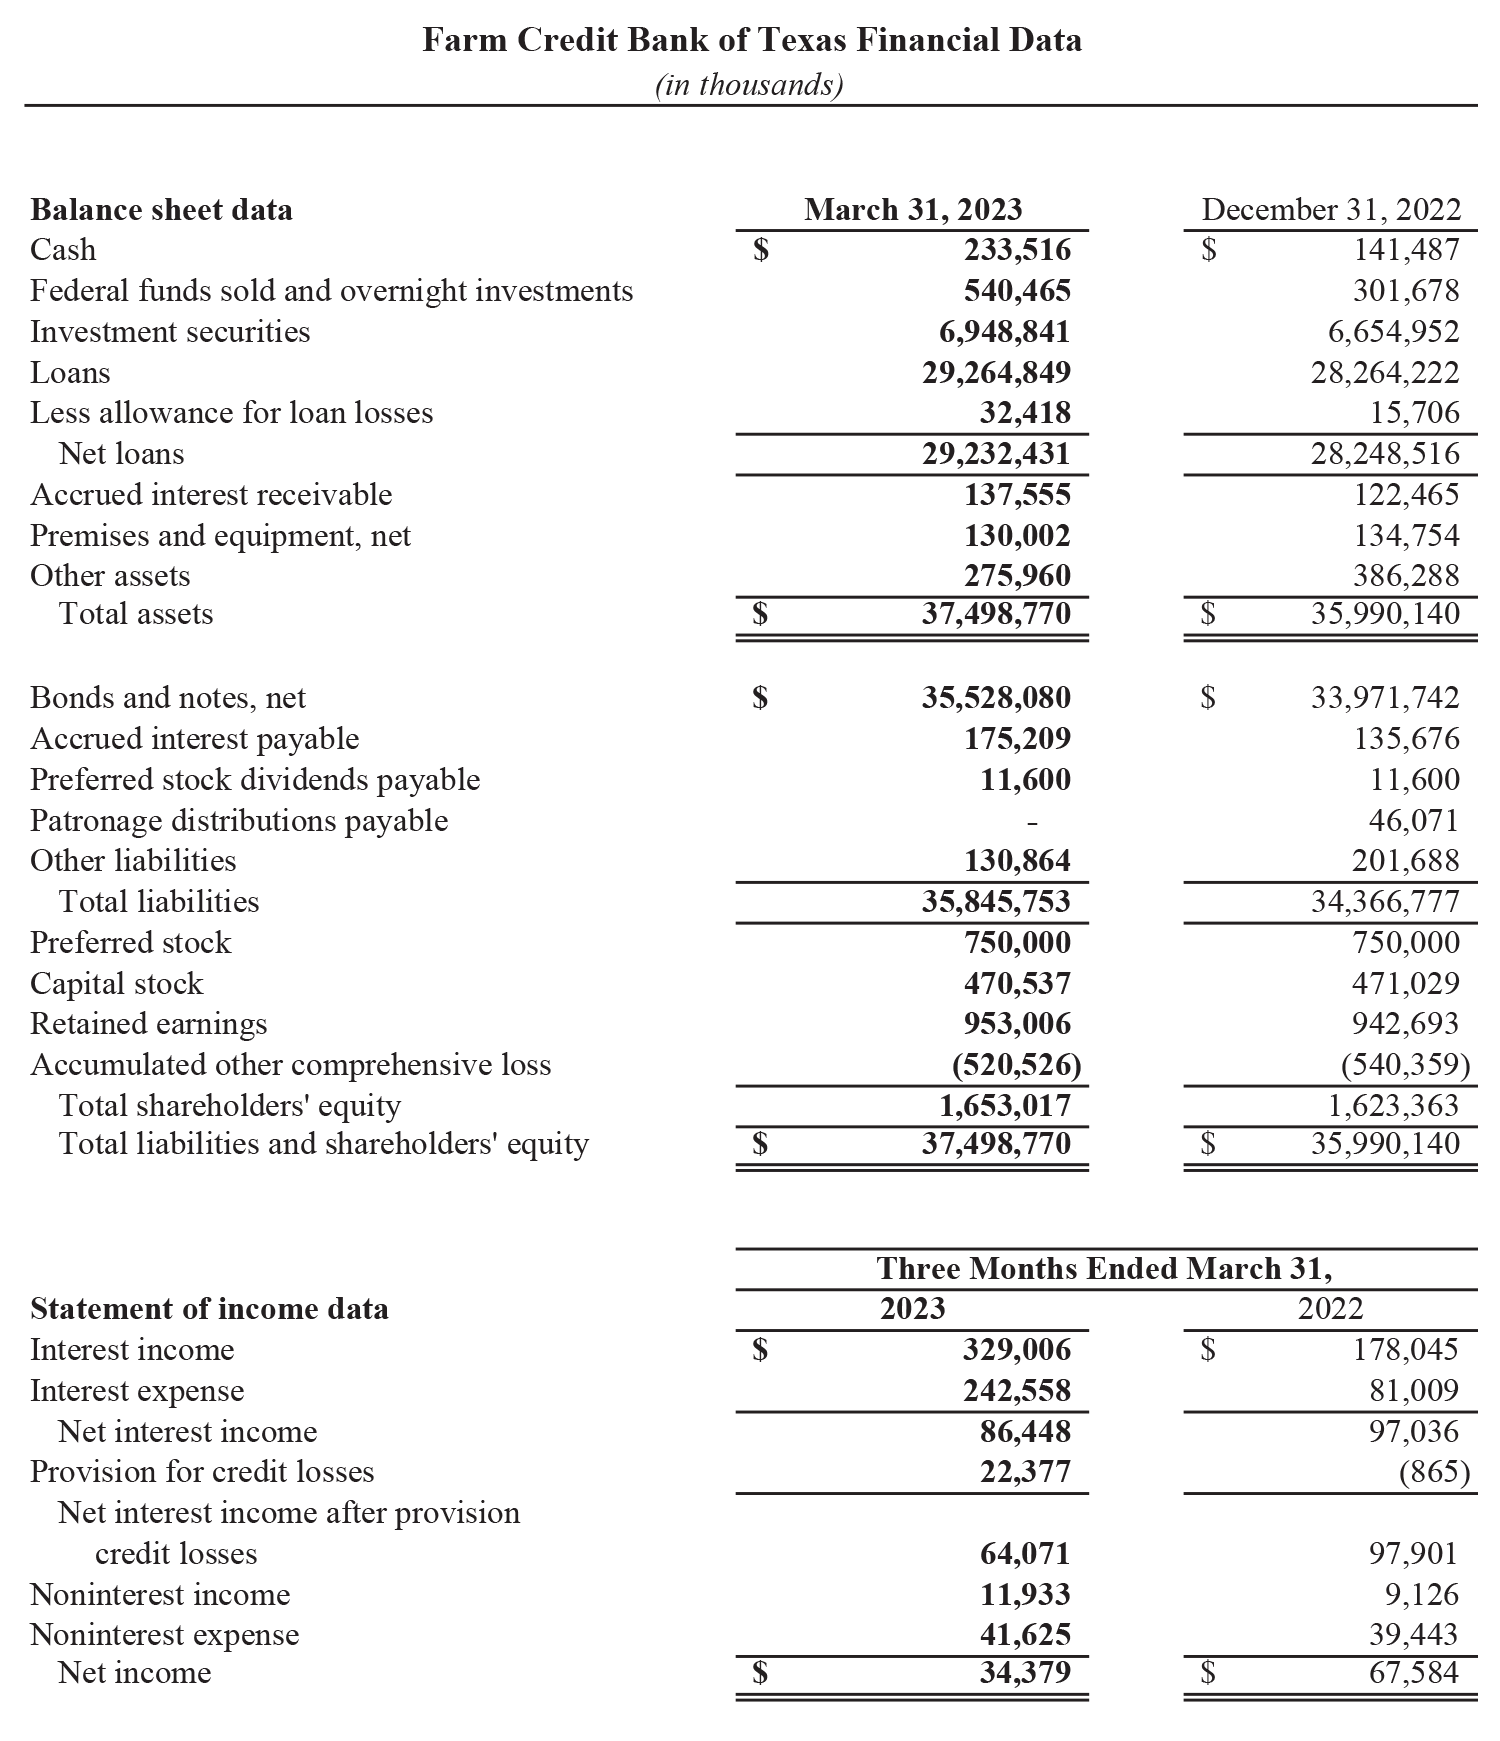 Snapshot of Farm Credit Bank of Texas' first-quarter (2023) financial results